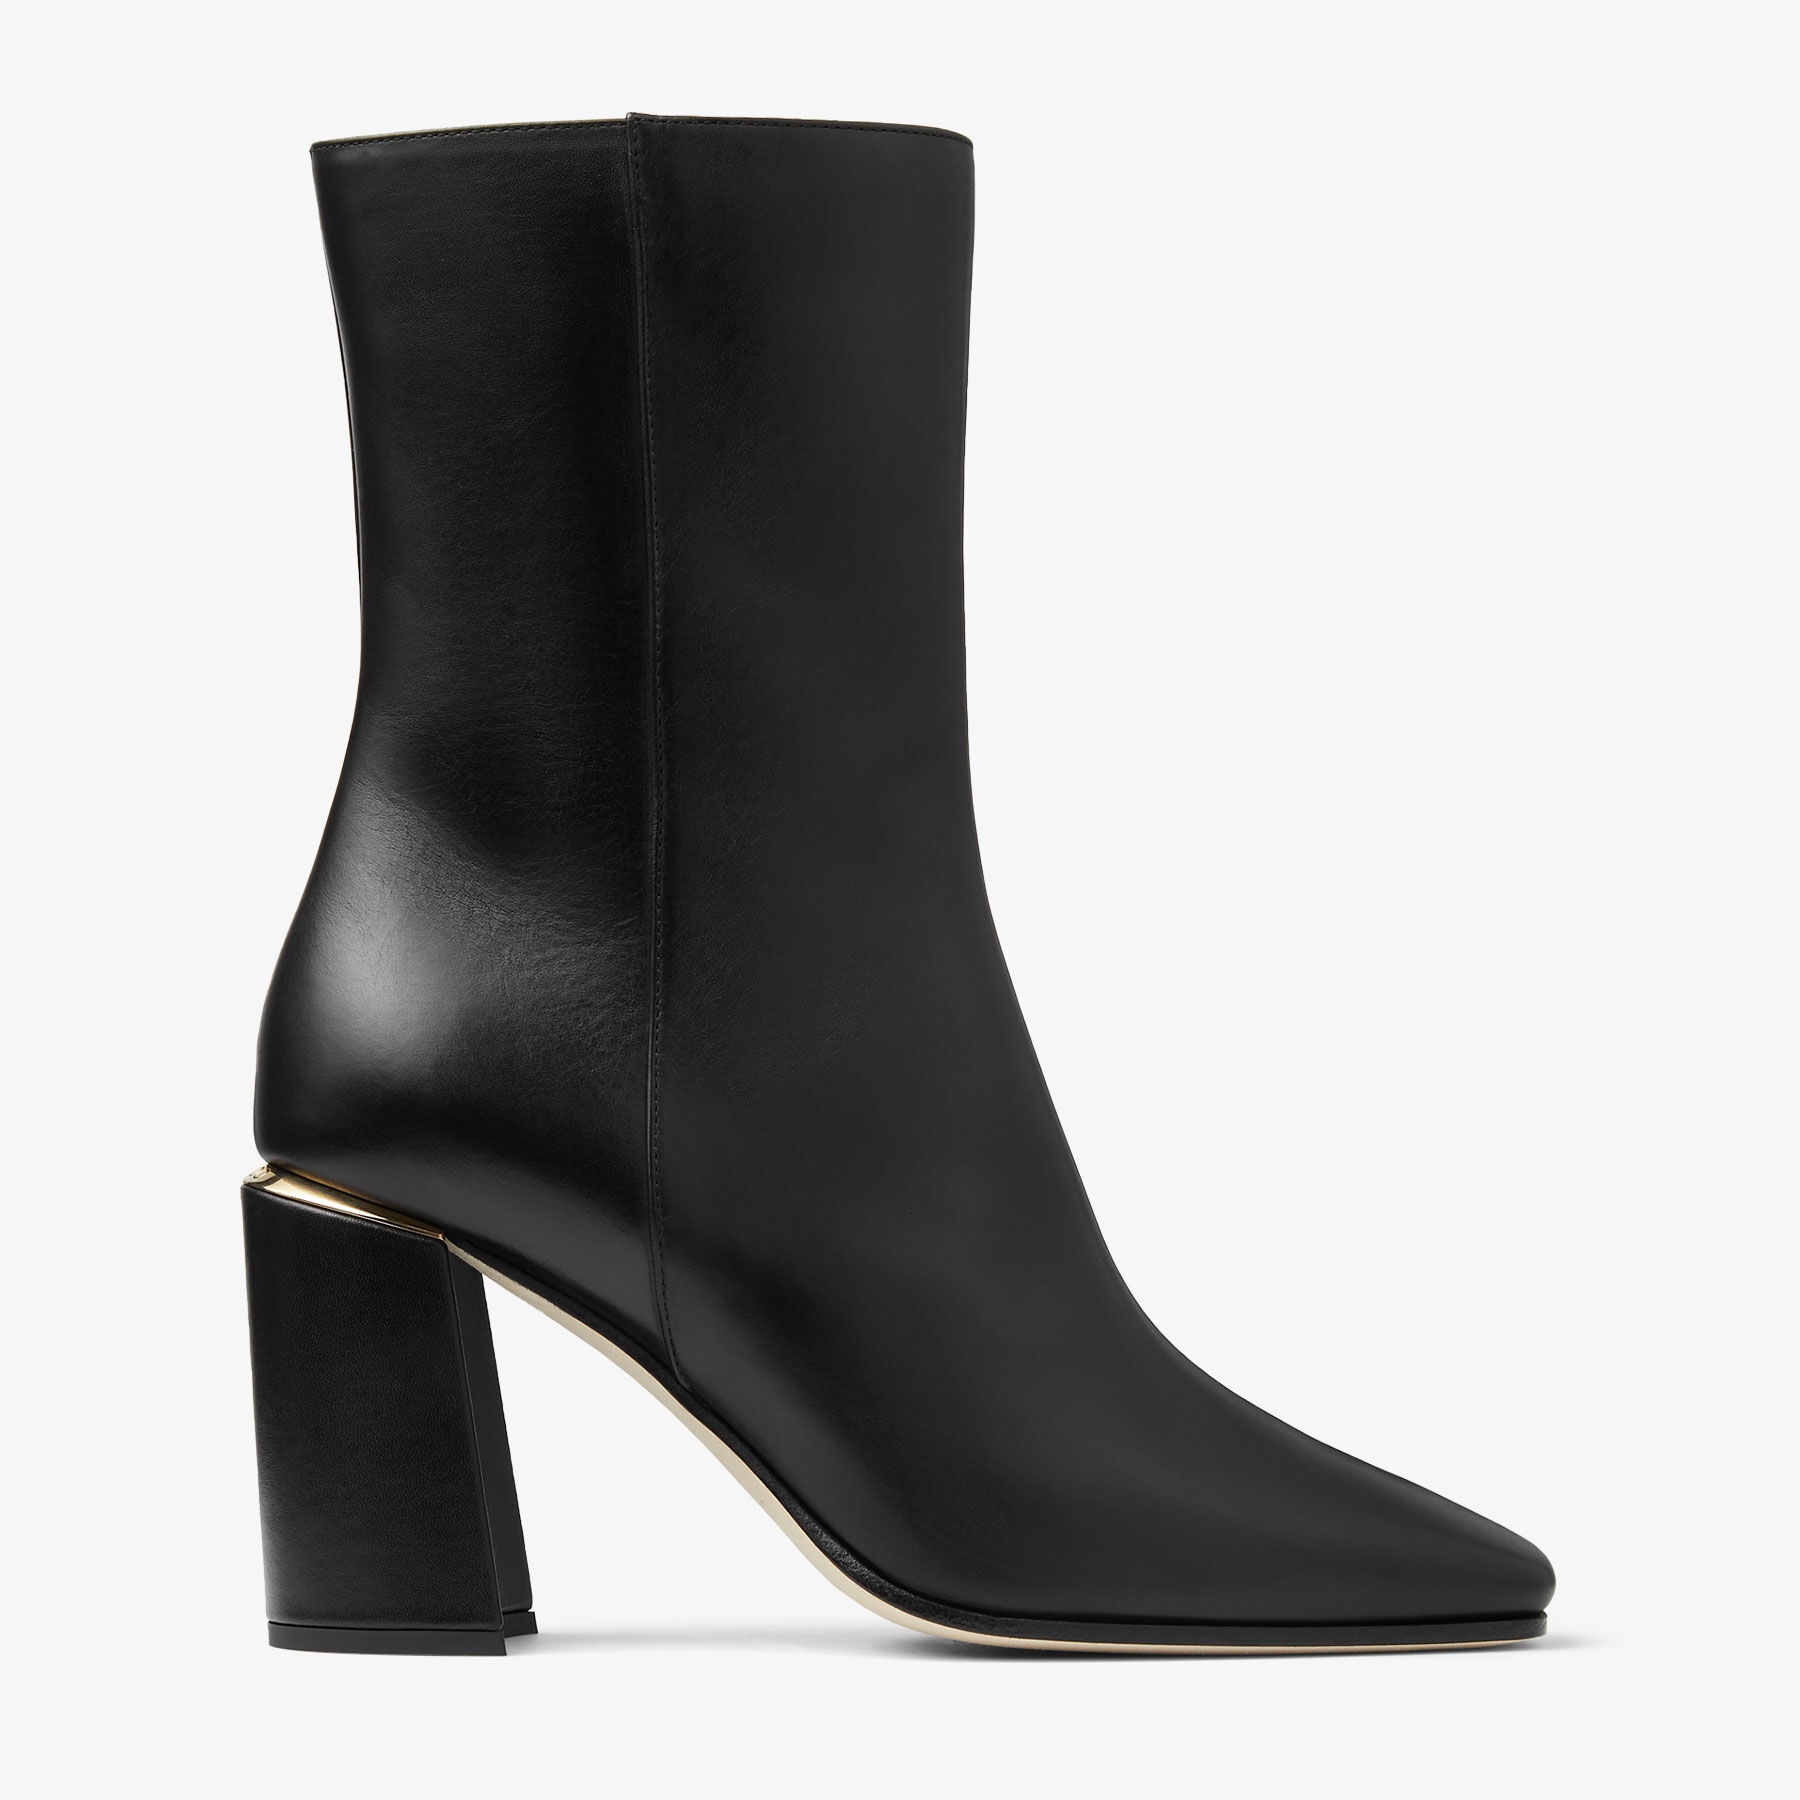 Loren Ankle Boot 85
Black Calf Leather Ankle Boots - 1